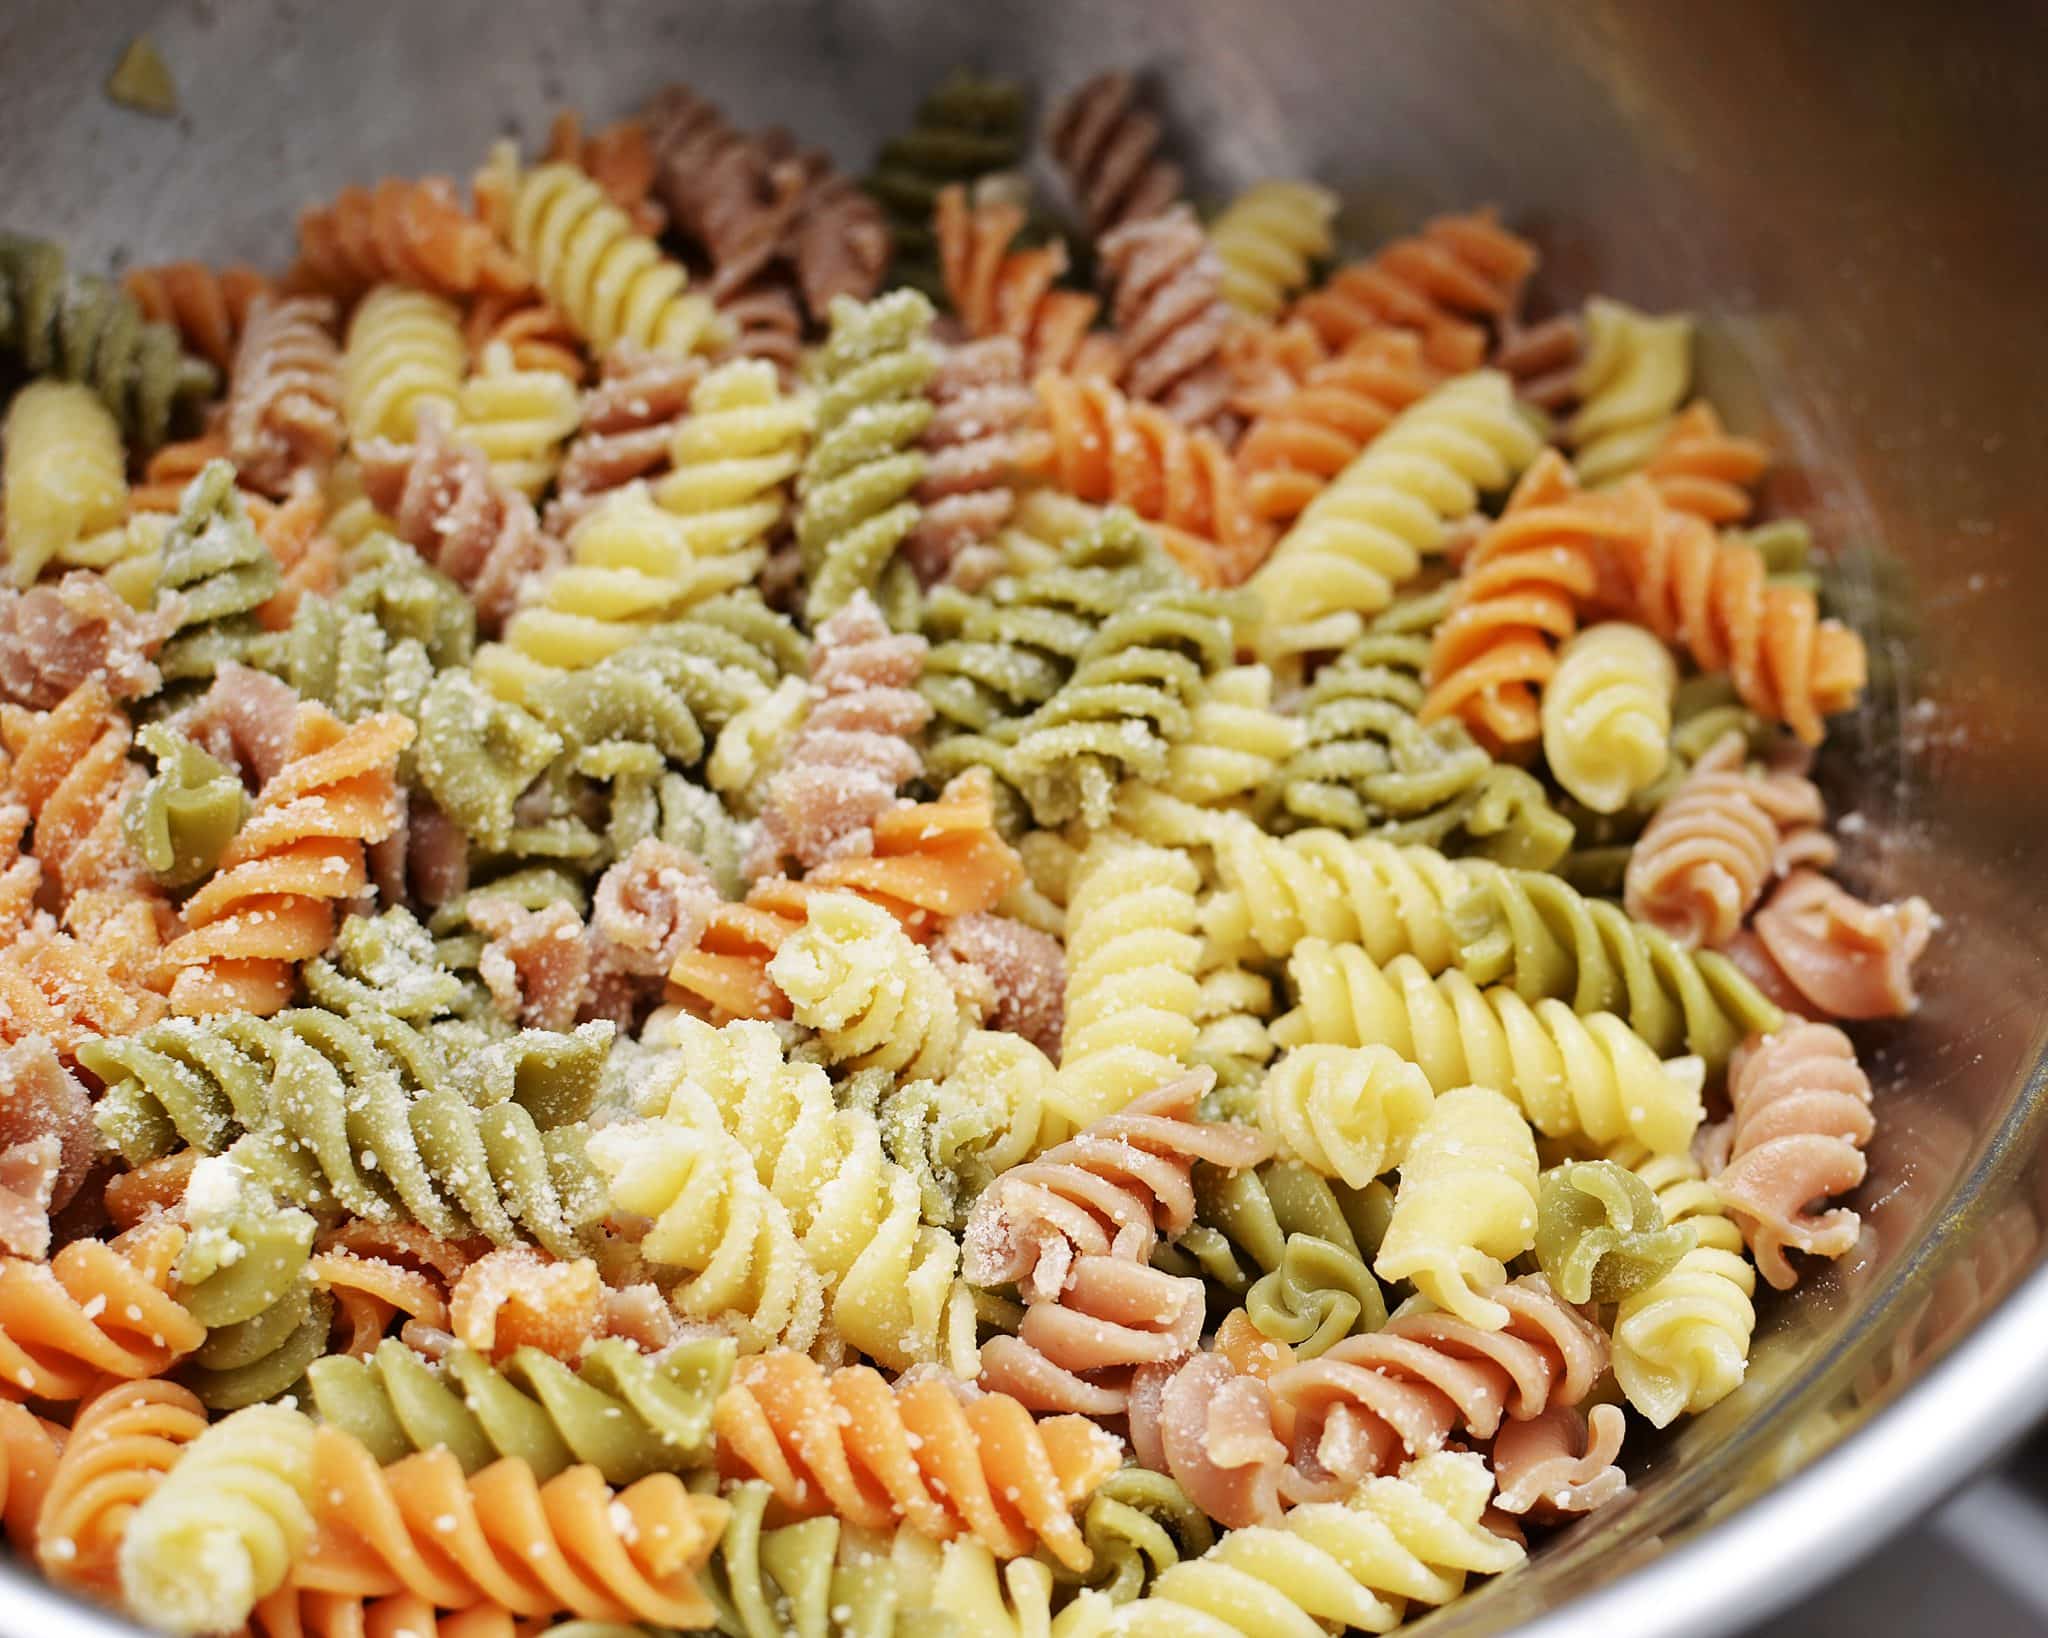 Close up view of pasta salad in a metal bowl.